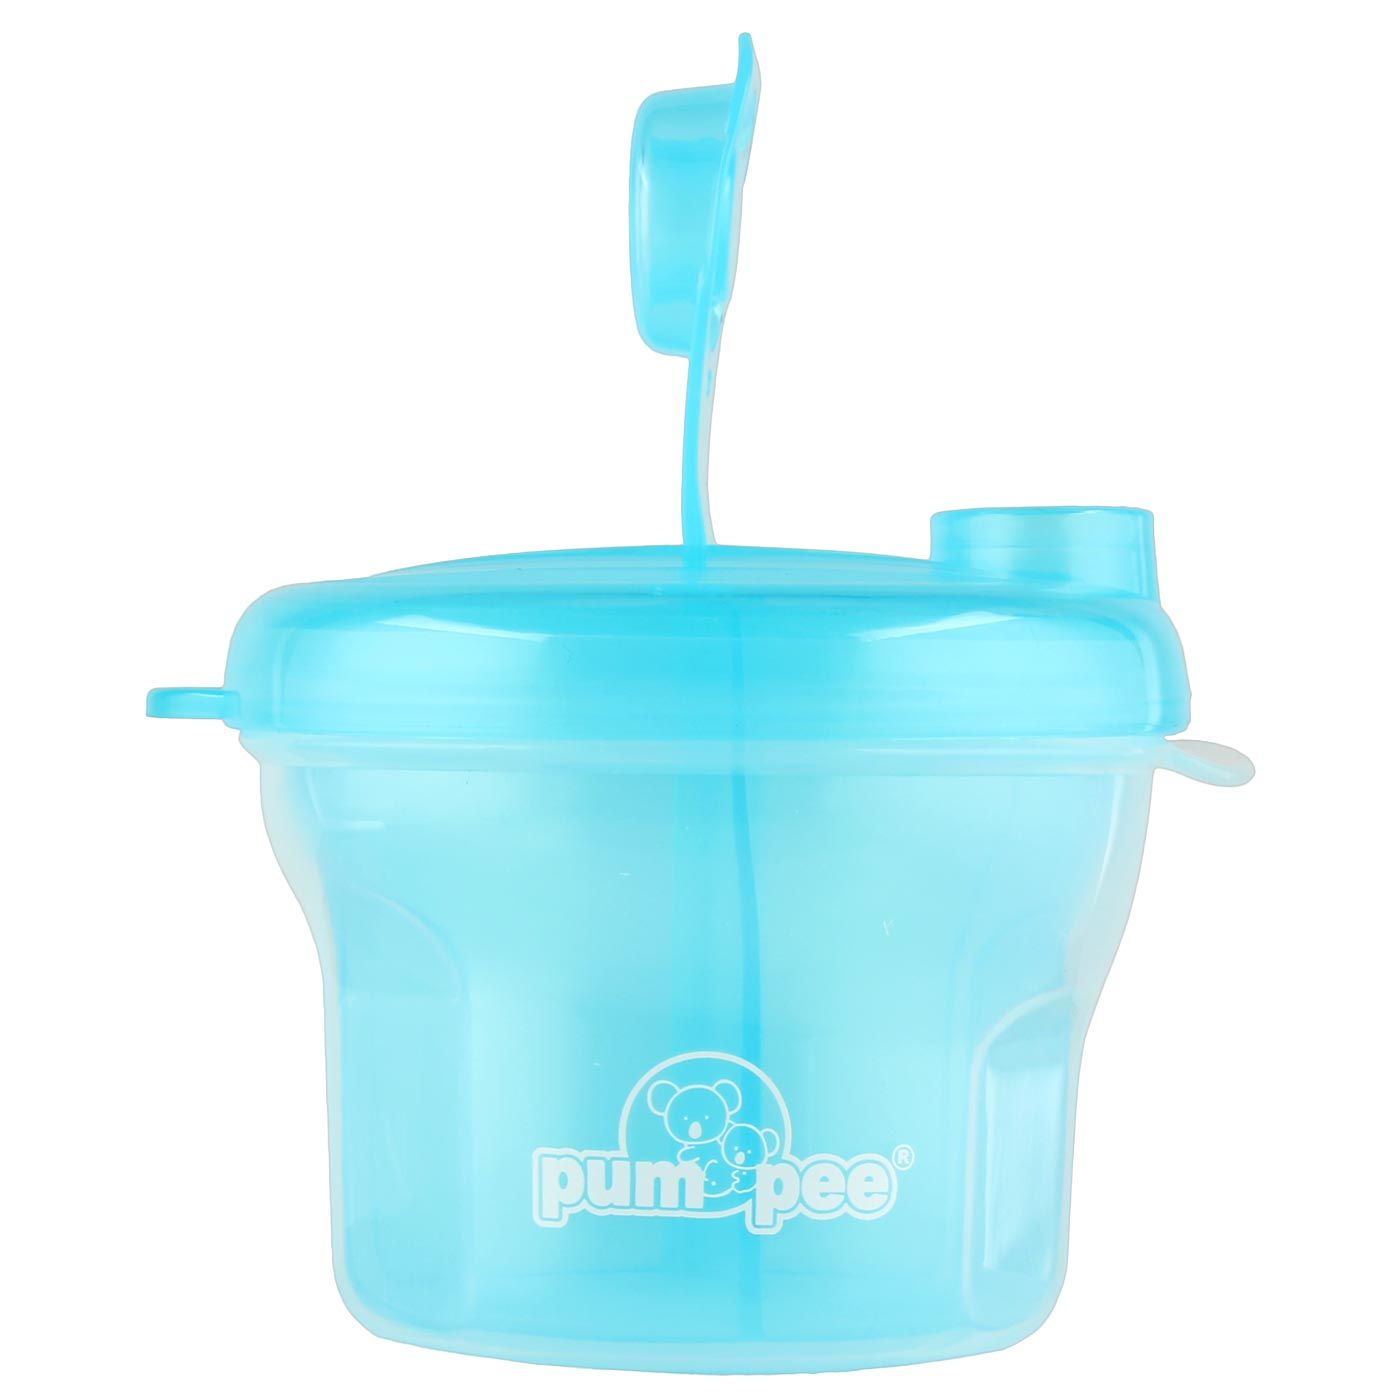 Pumpee Jumbo 3 Section Milk Container | PA-109MPB - 3